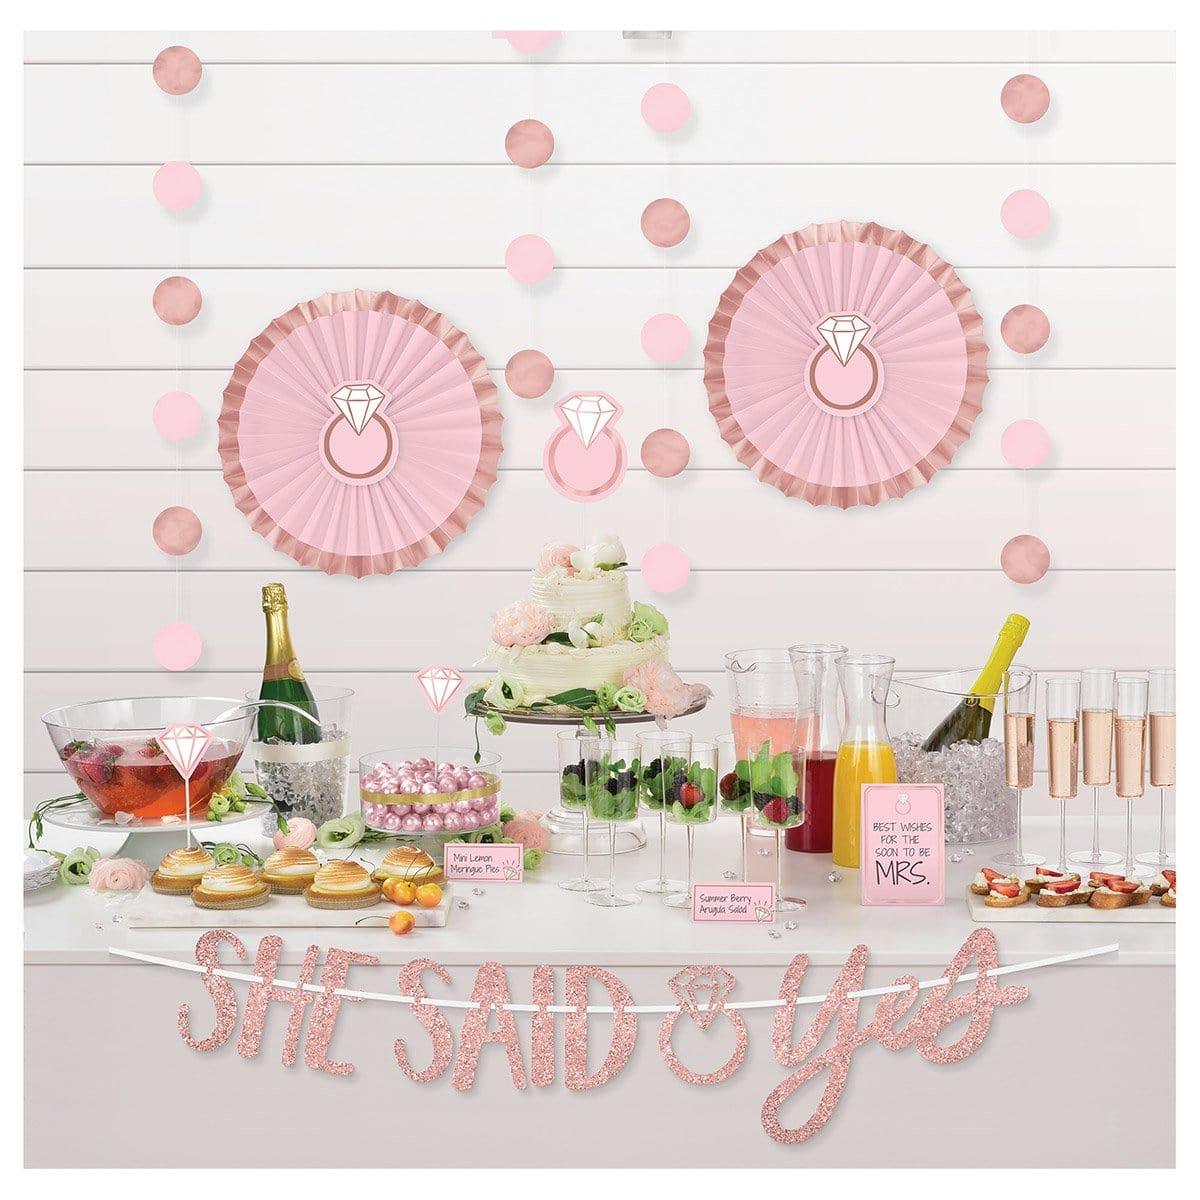 Buy Wedding Blush Wedding - Buffet Table Decorating Kit sold at Party Expert